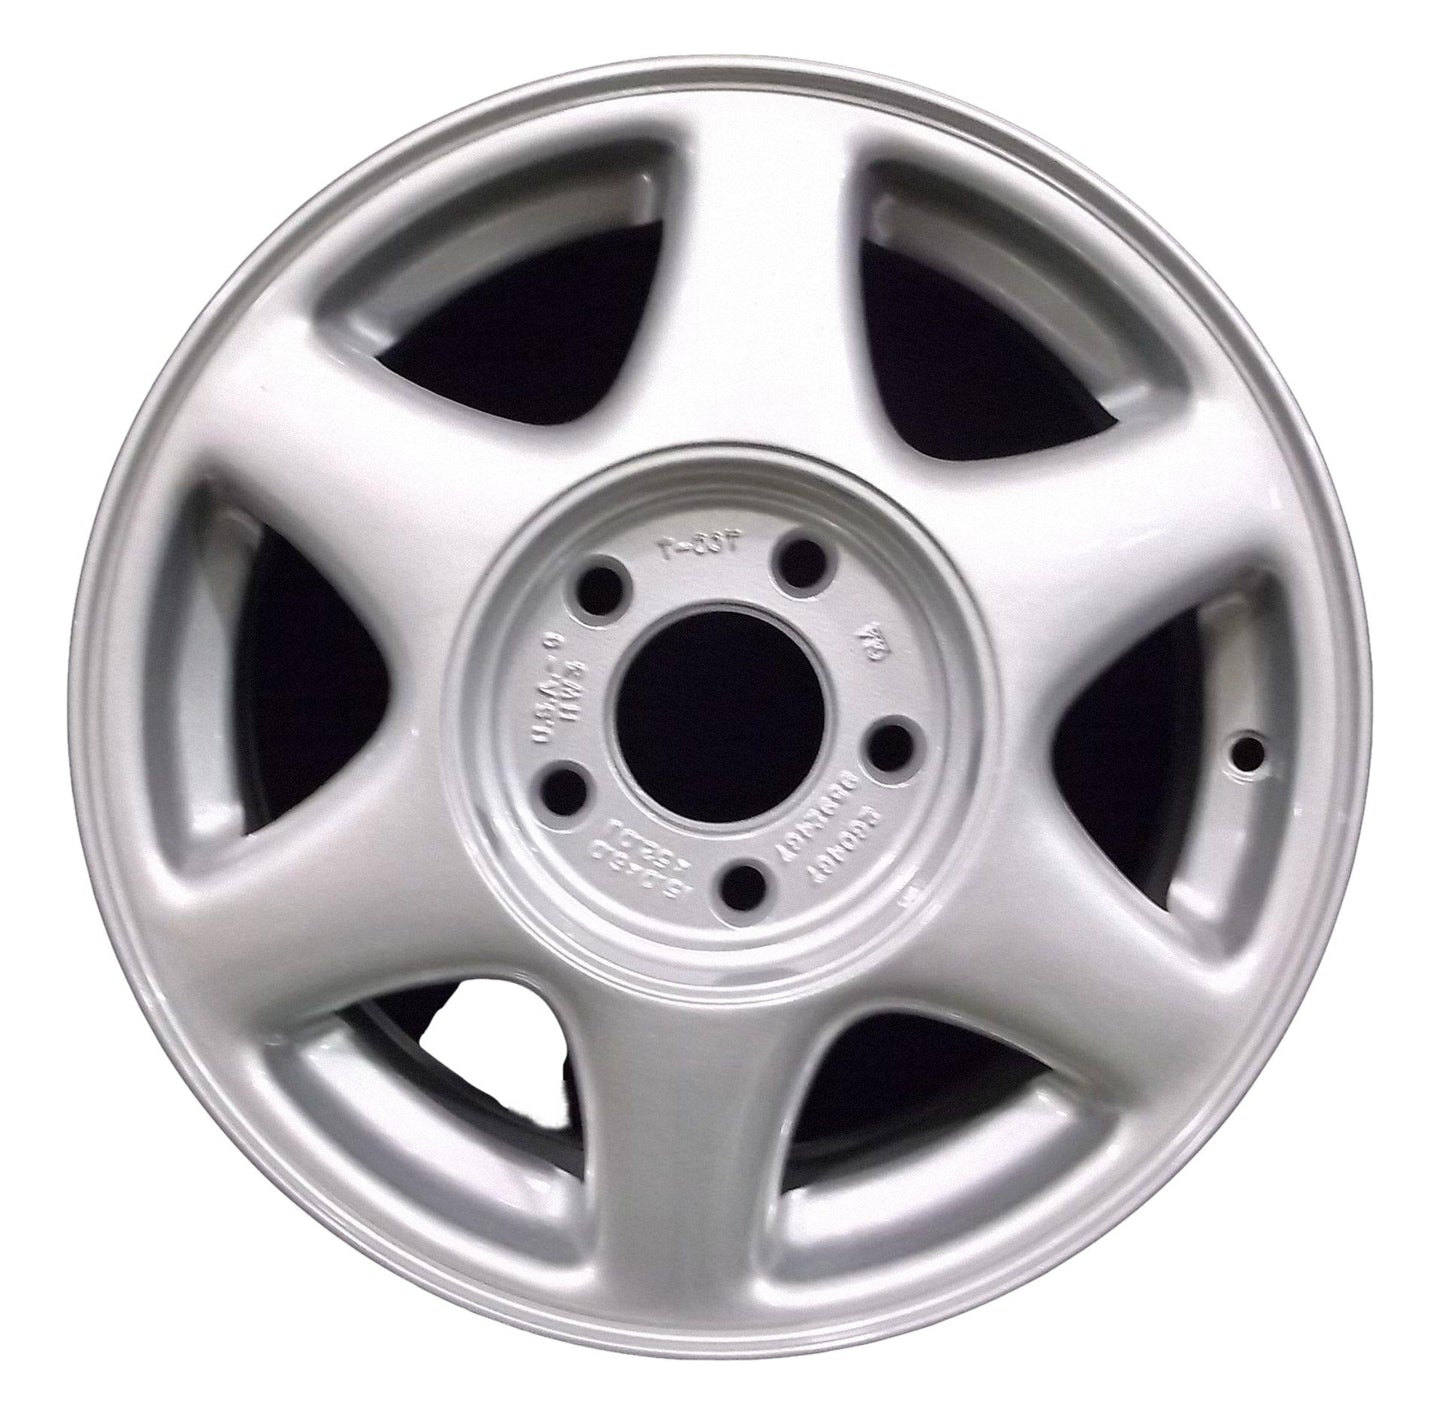 Oldsmobile Silhouette  2001, 2002 Factory OEM Car Wheel Size 15x6 Alloy WAO.6044.PS02.FF